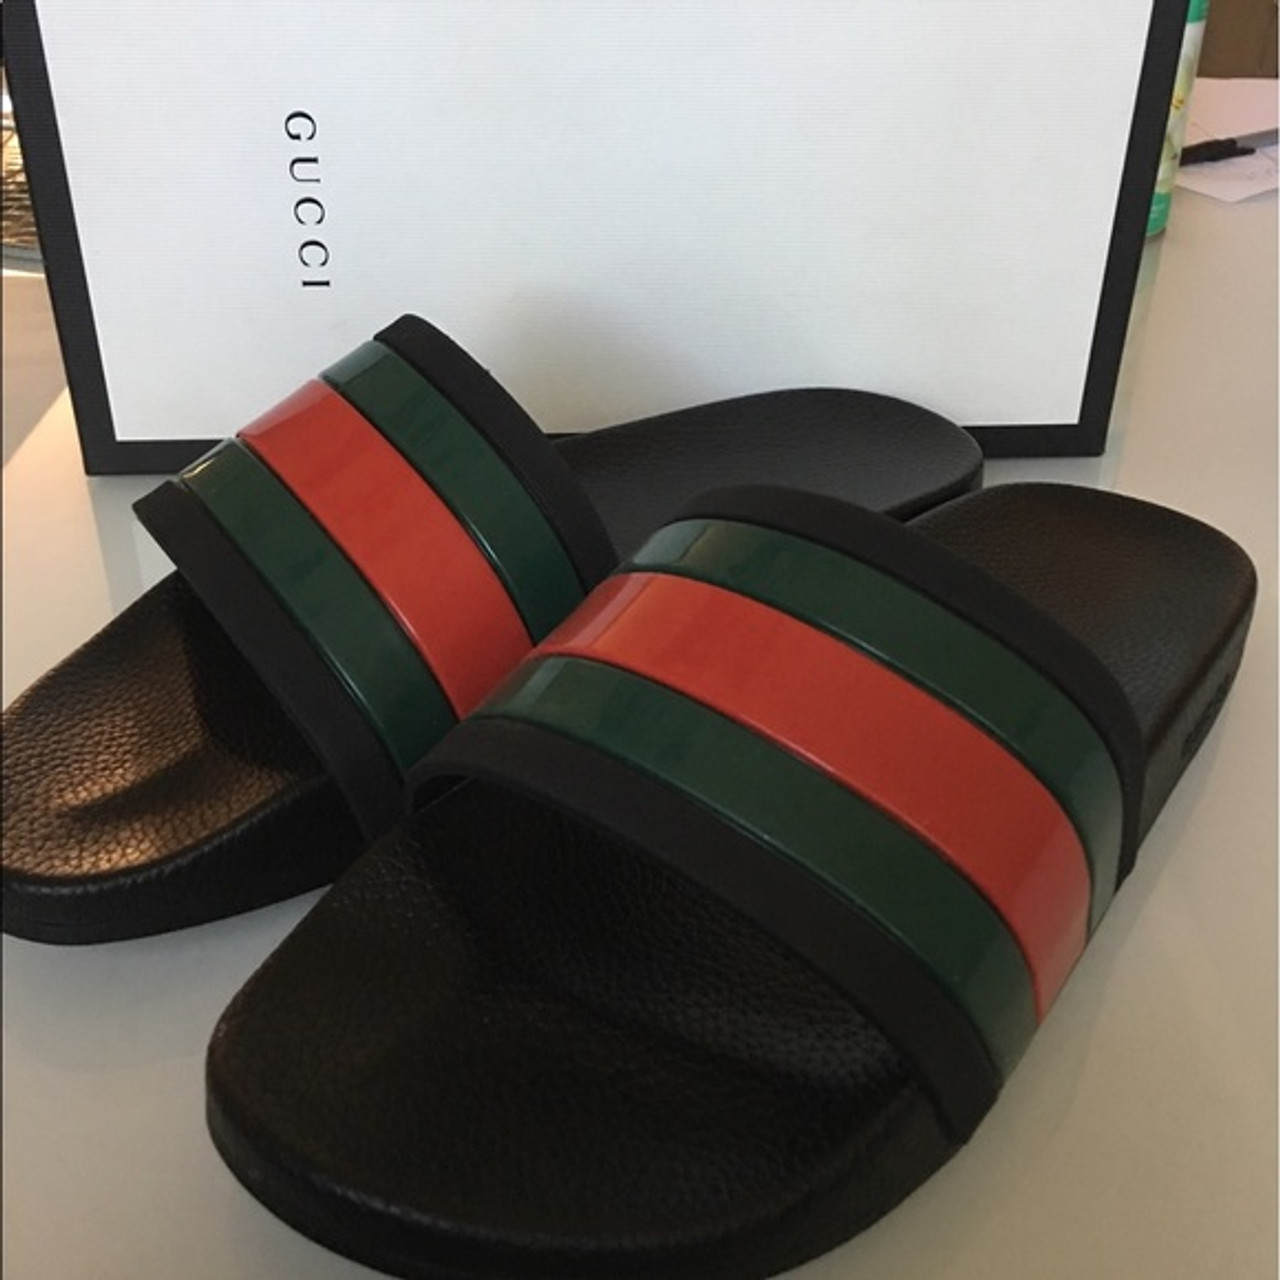 resterende indsats skuffet where to buy the best stockX High quality replica UA Gucci flip flops  slides (select color) Hypedripz is the best high quality trusted clone  replica fake designer hypebeast seller website 2021